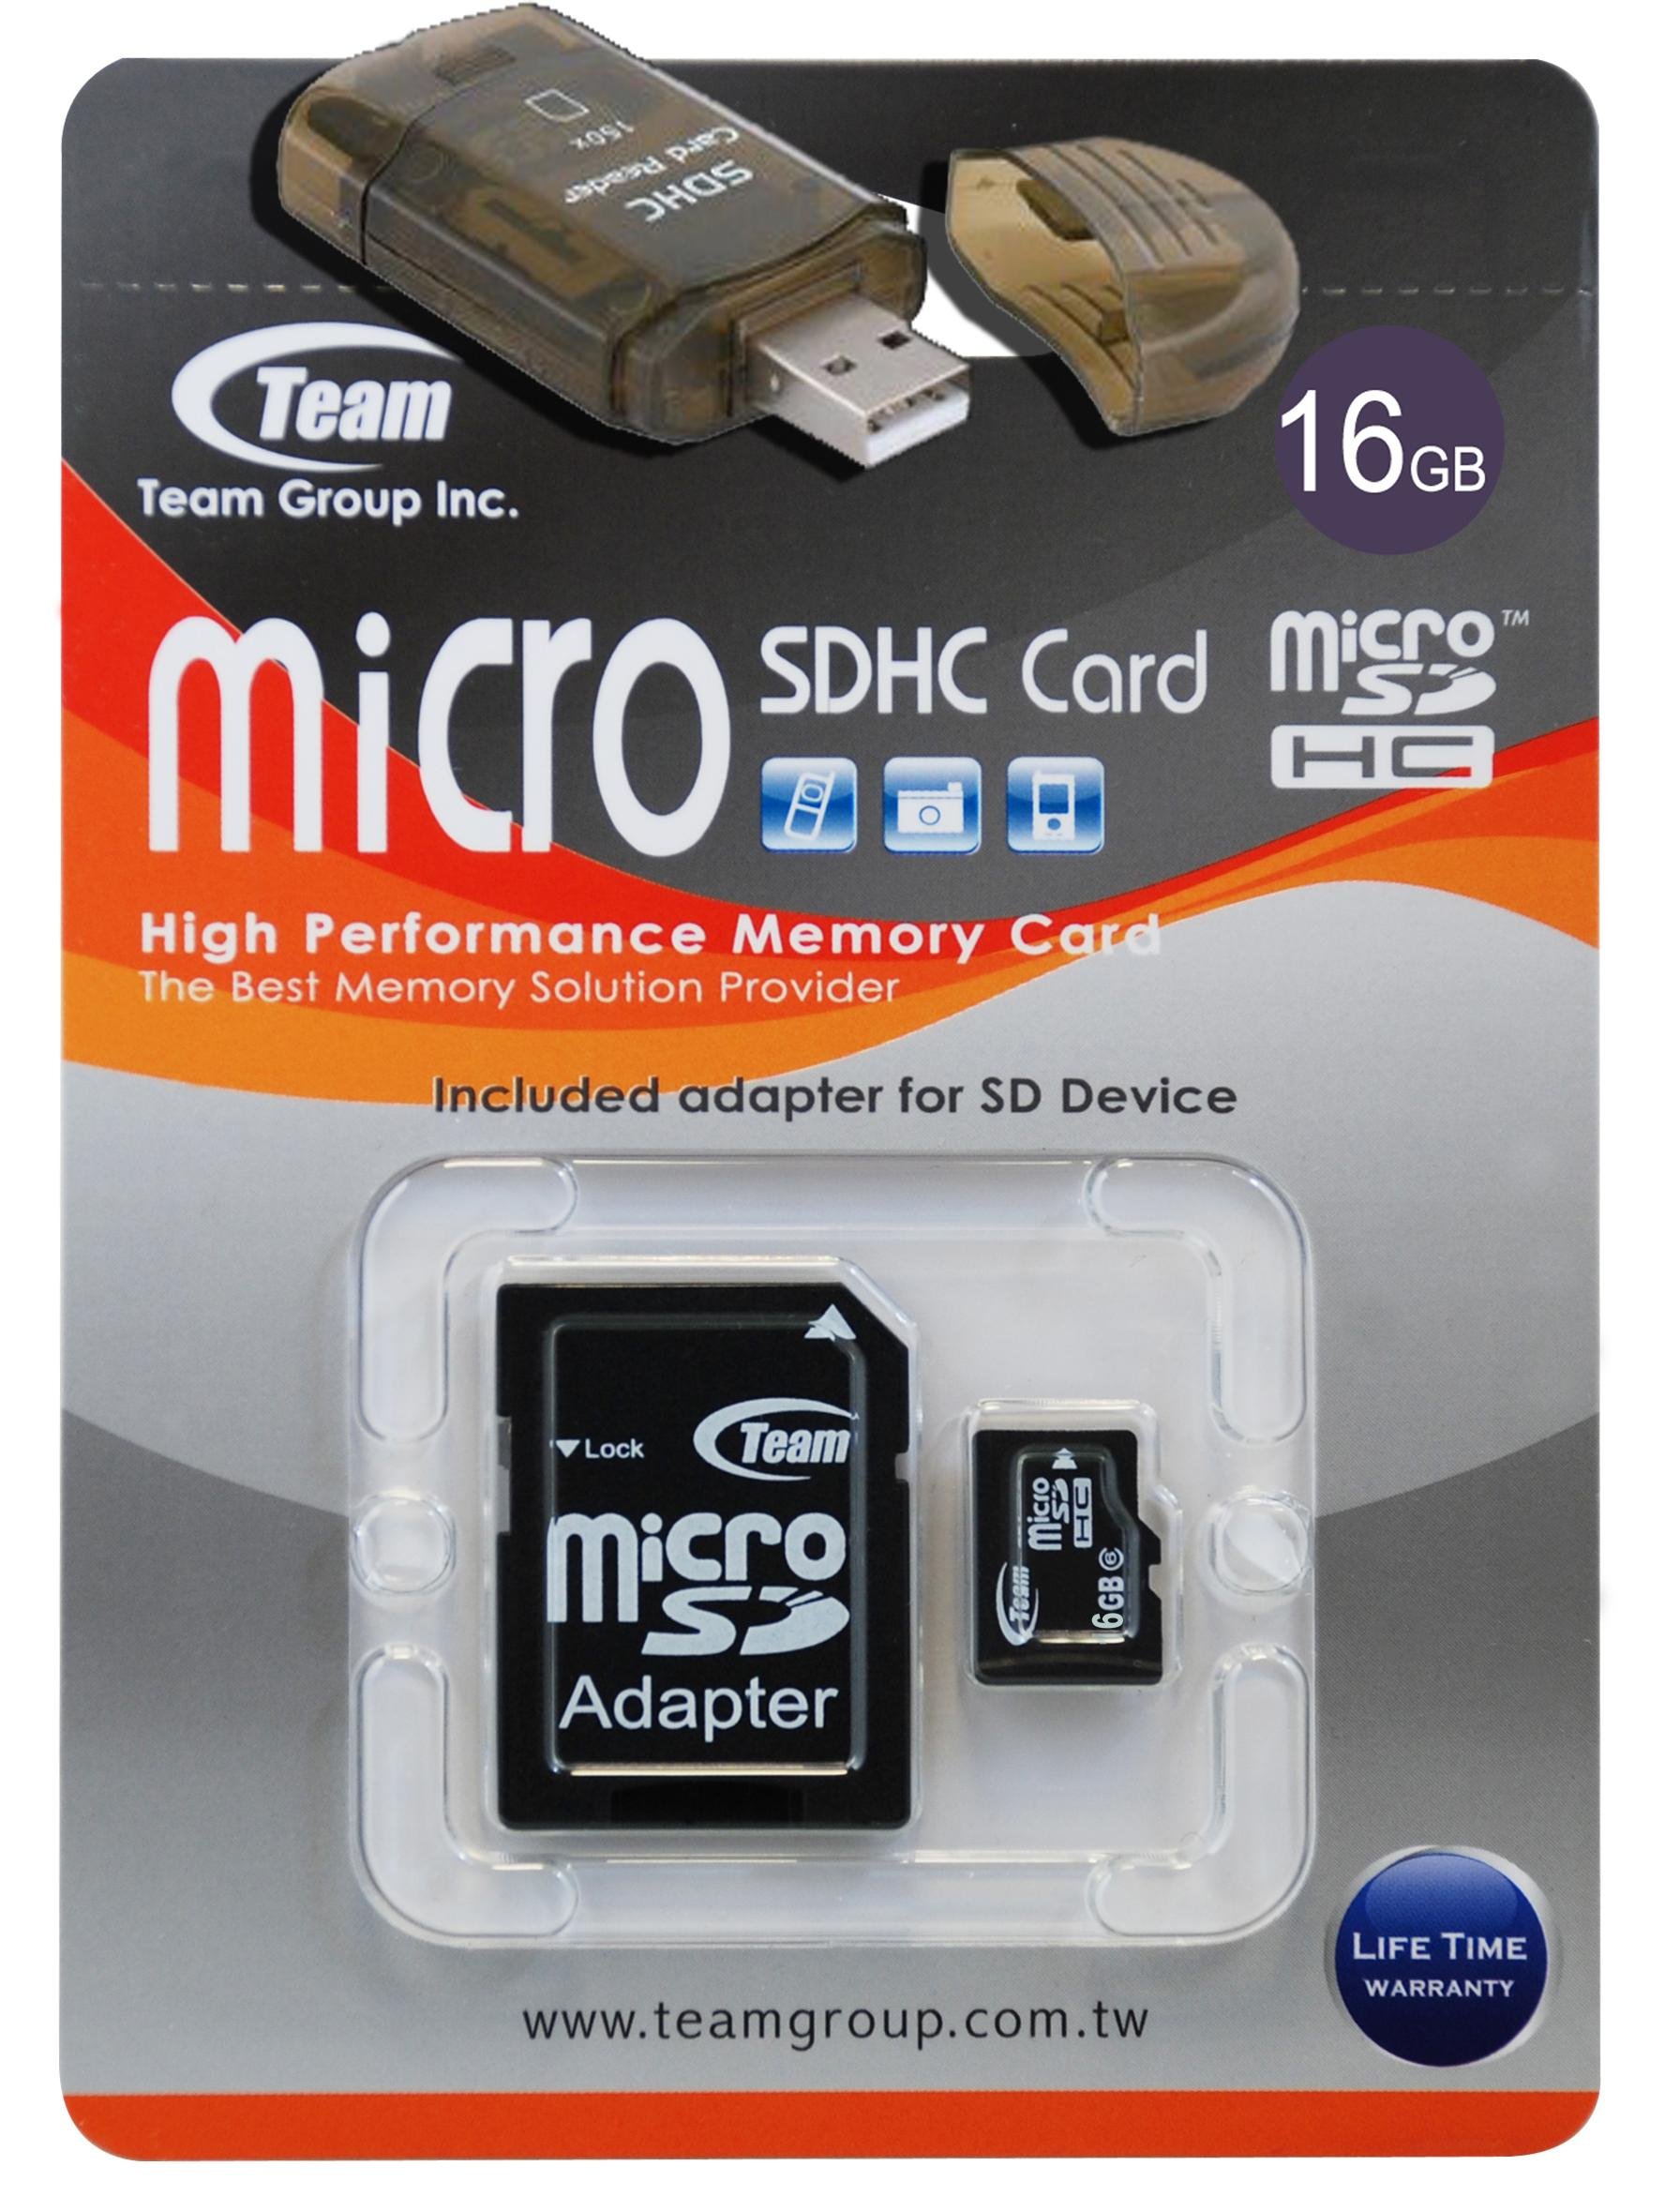 16GB Turbo Speed Class 6 MicroSDHC Memory Card For SONY ERICSSON SATIO A U5A. High Speed Card Comes with a free SD and USB Ad